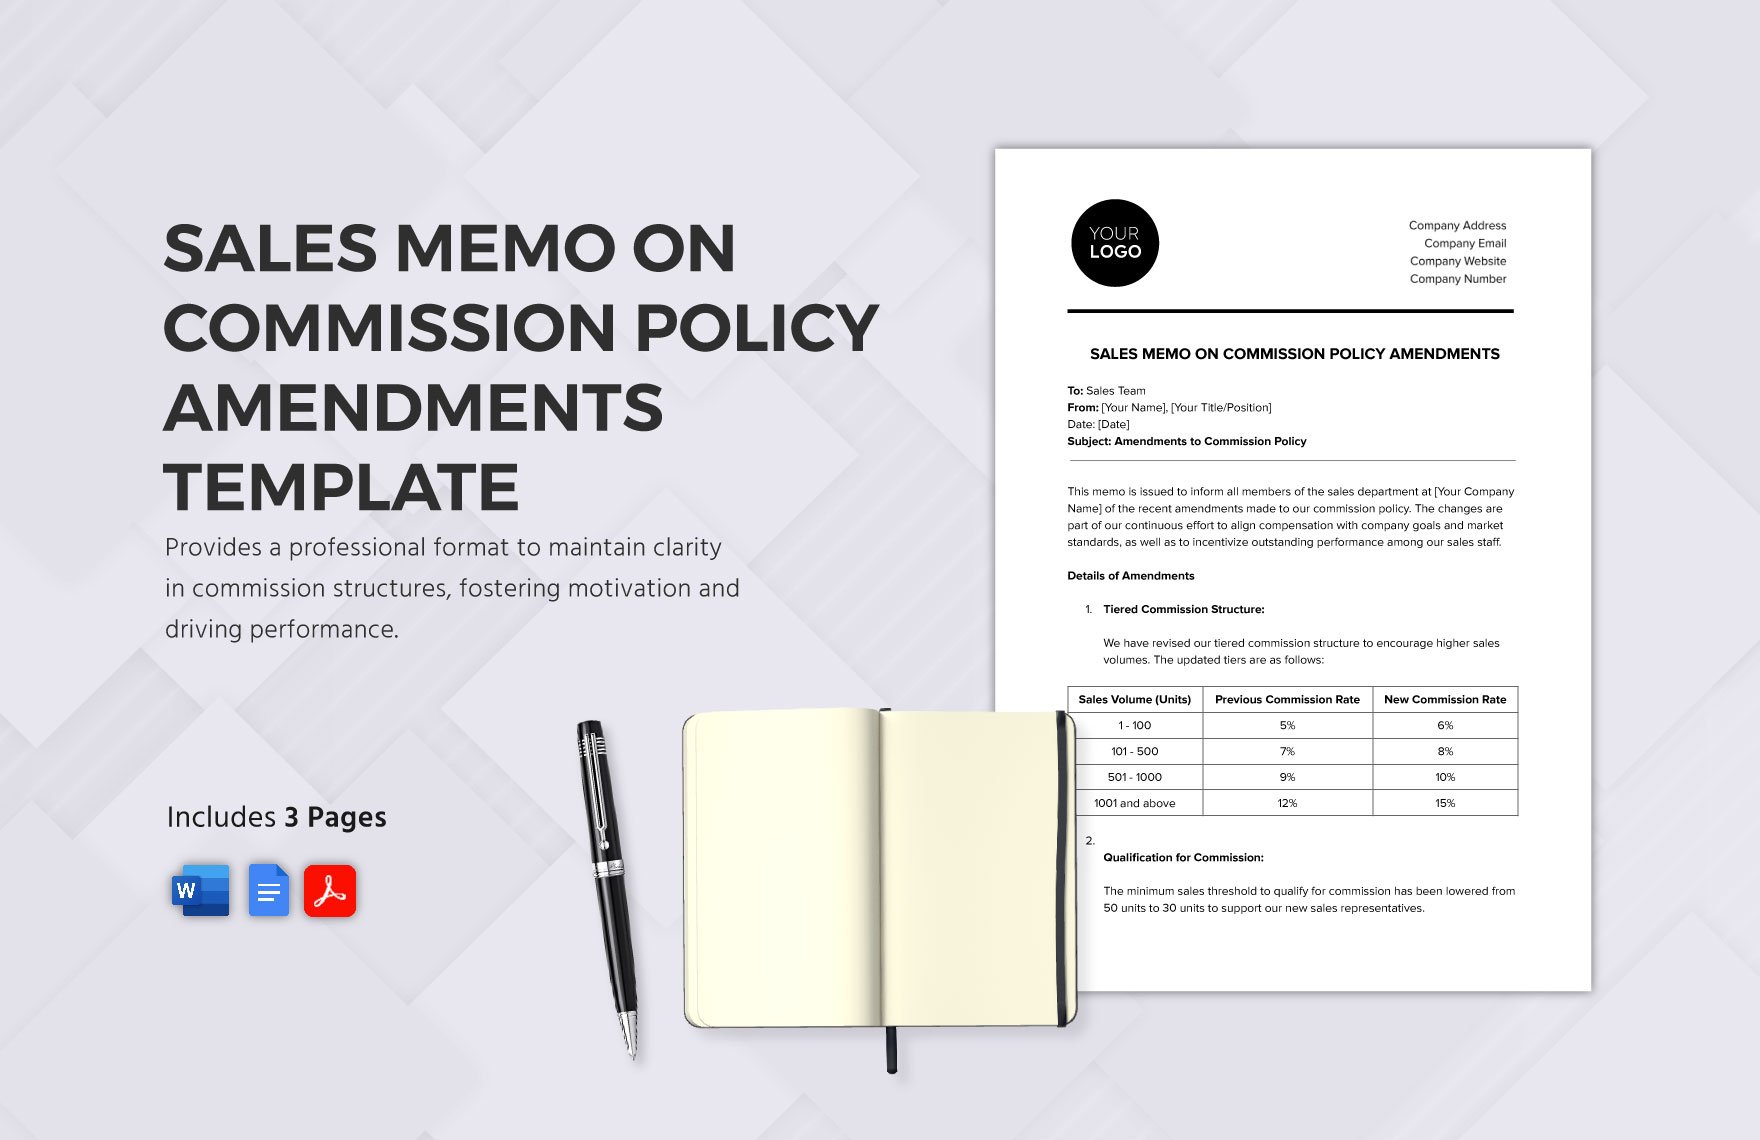 Sales Memo on Commission Policy Amendments Template